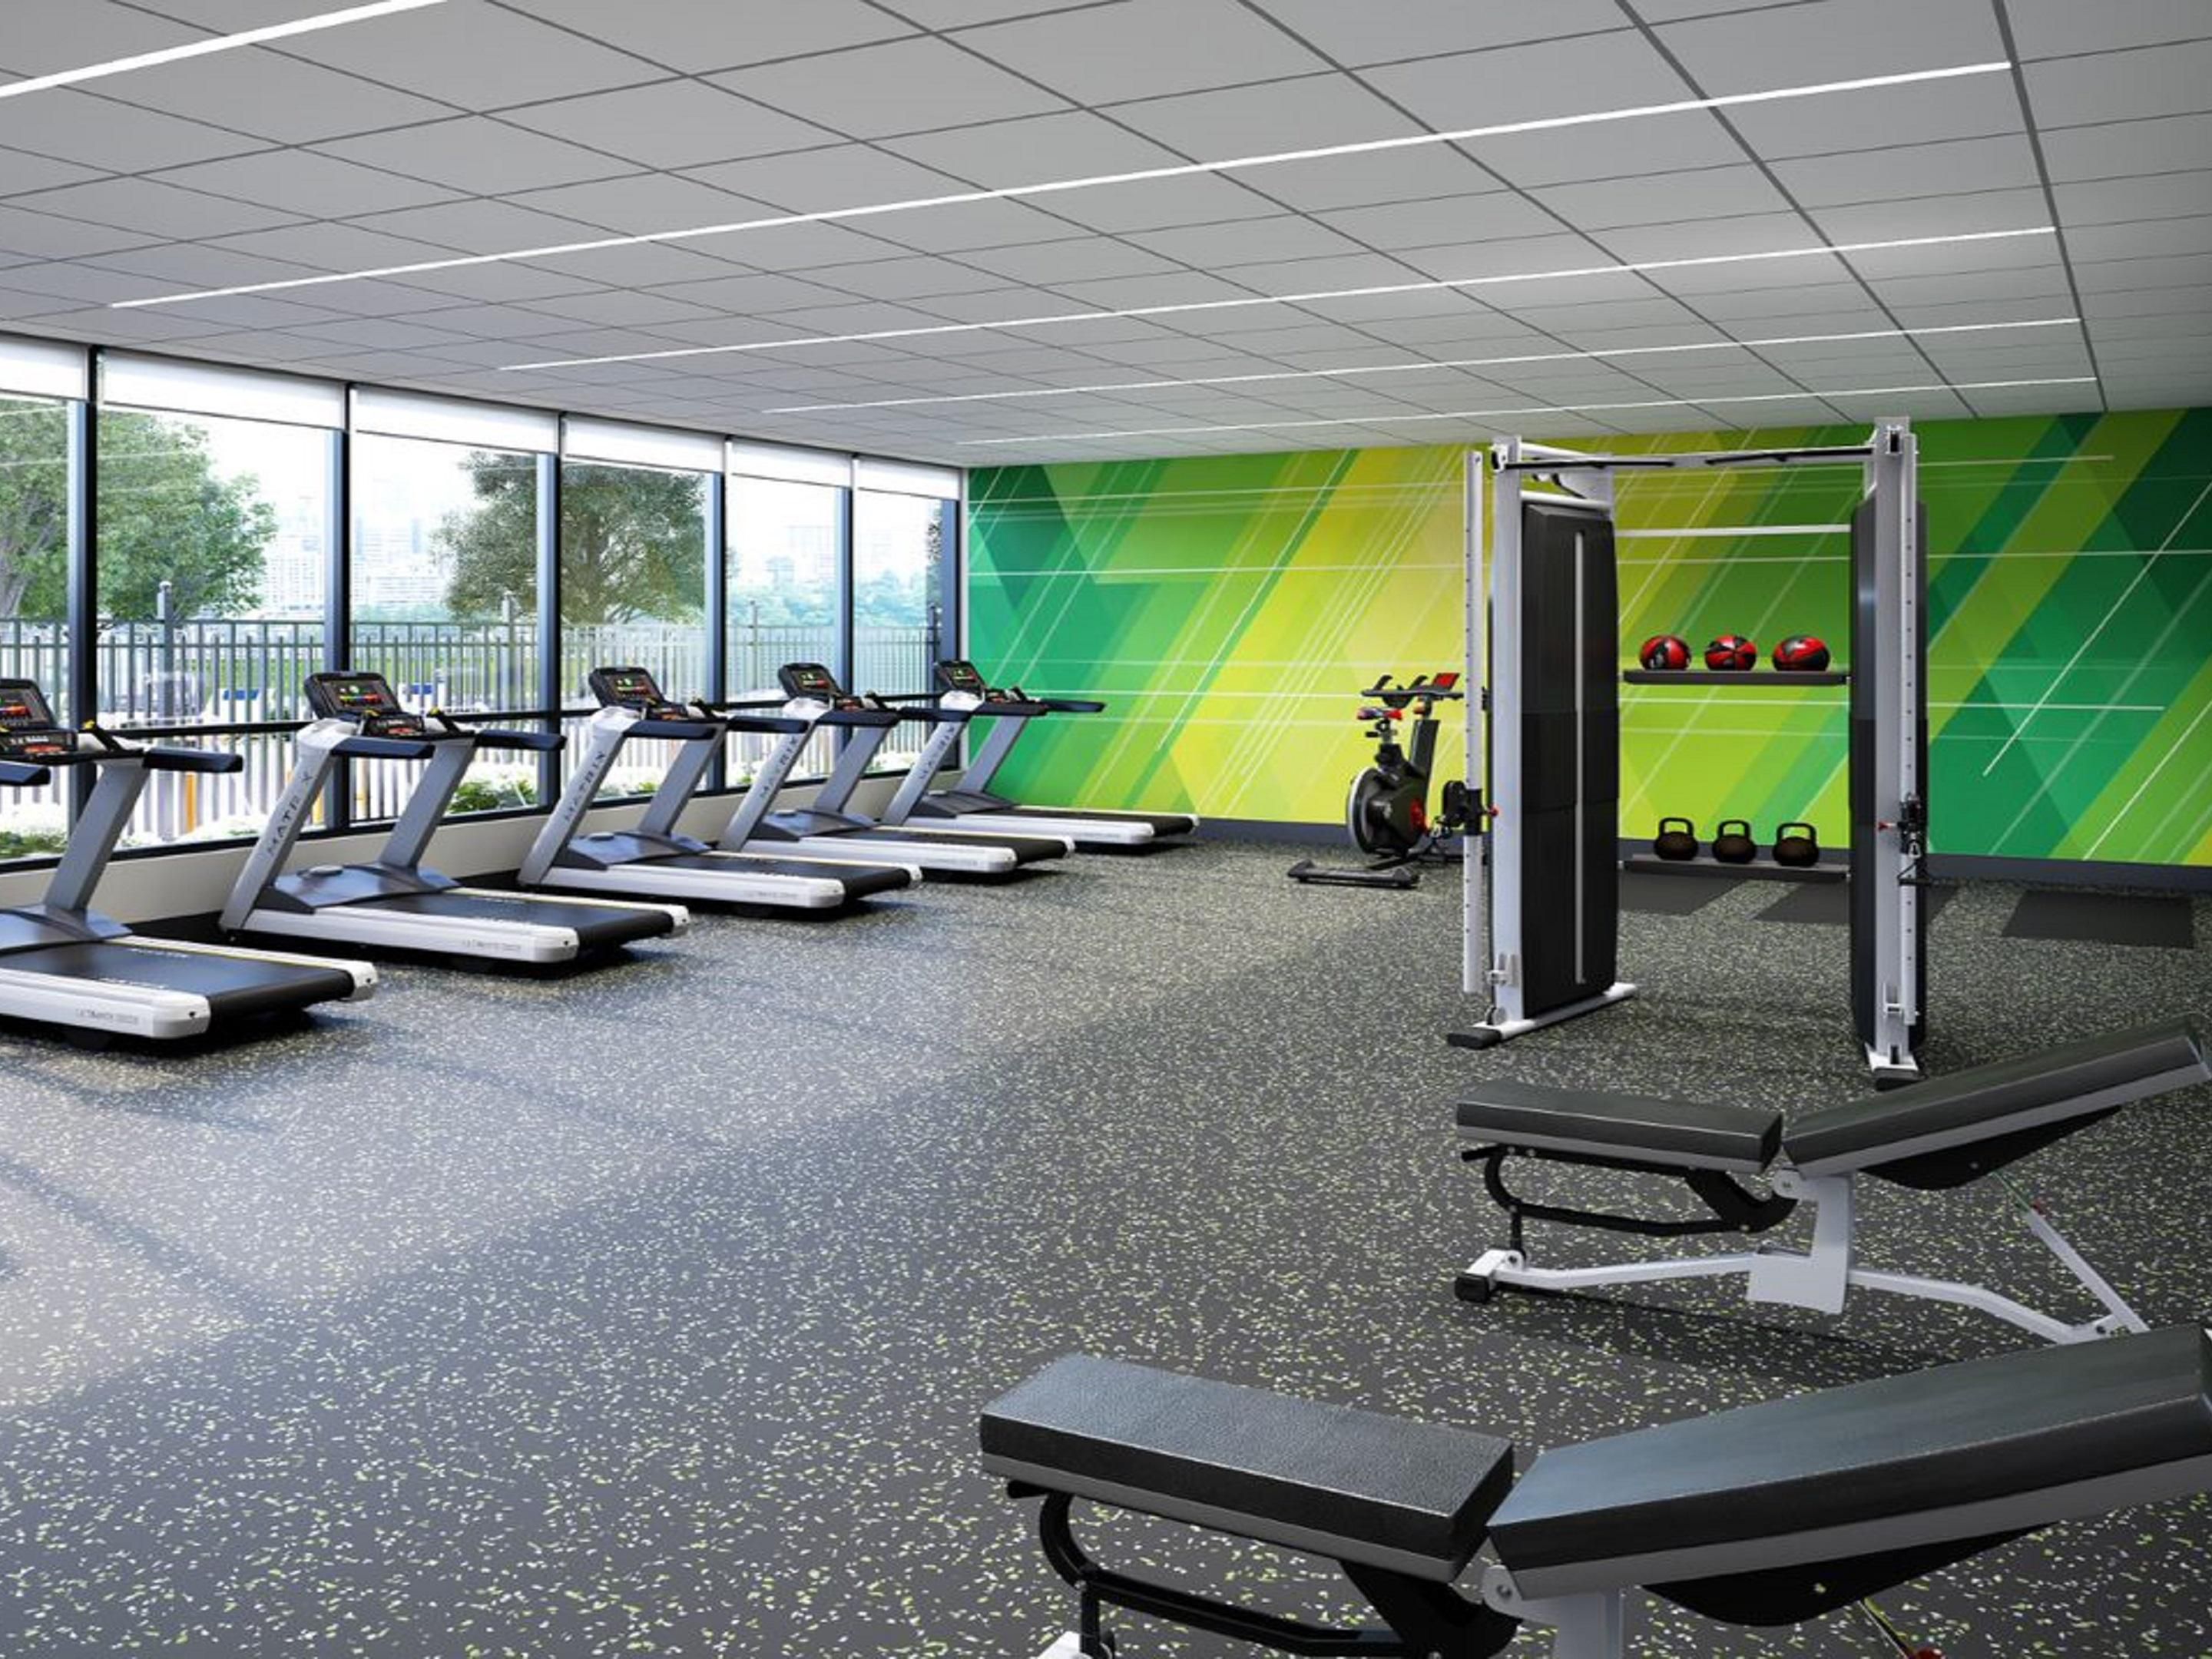 Get your sweat on in our complimentary, fully equipped fitness center- open from 12am to 12pm.